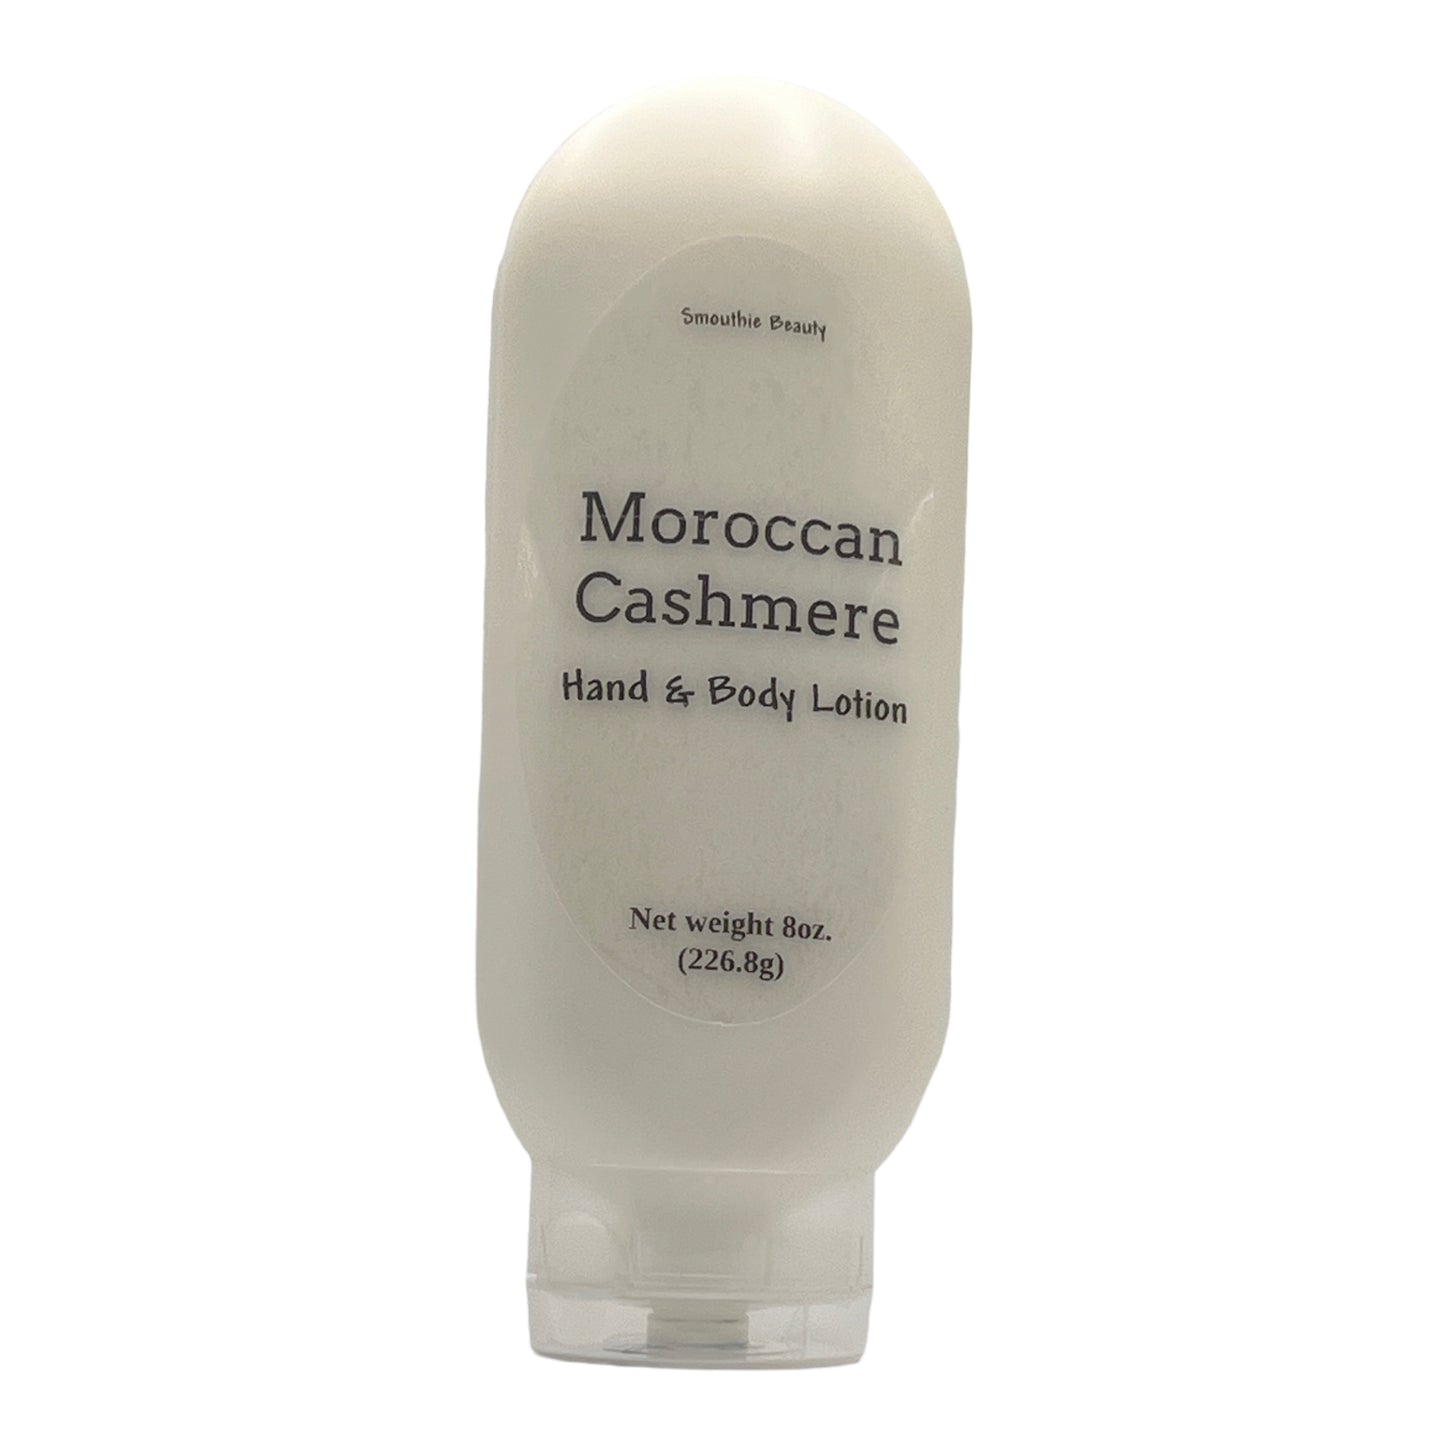 Moroccan Cashmere Hand & Body Lotion